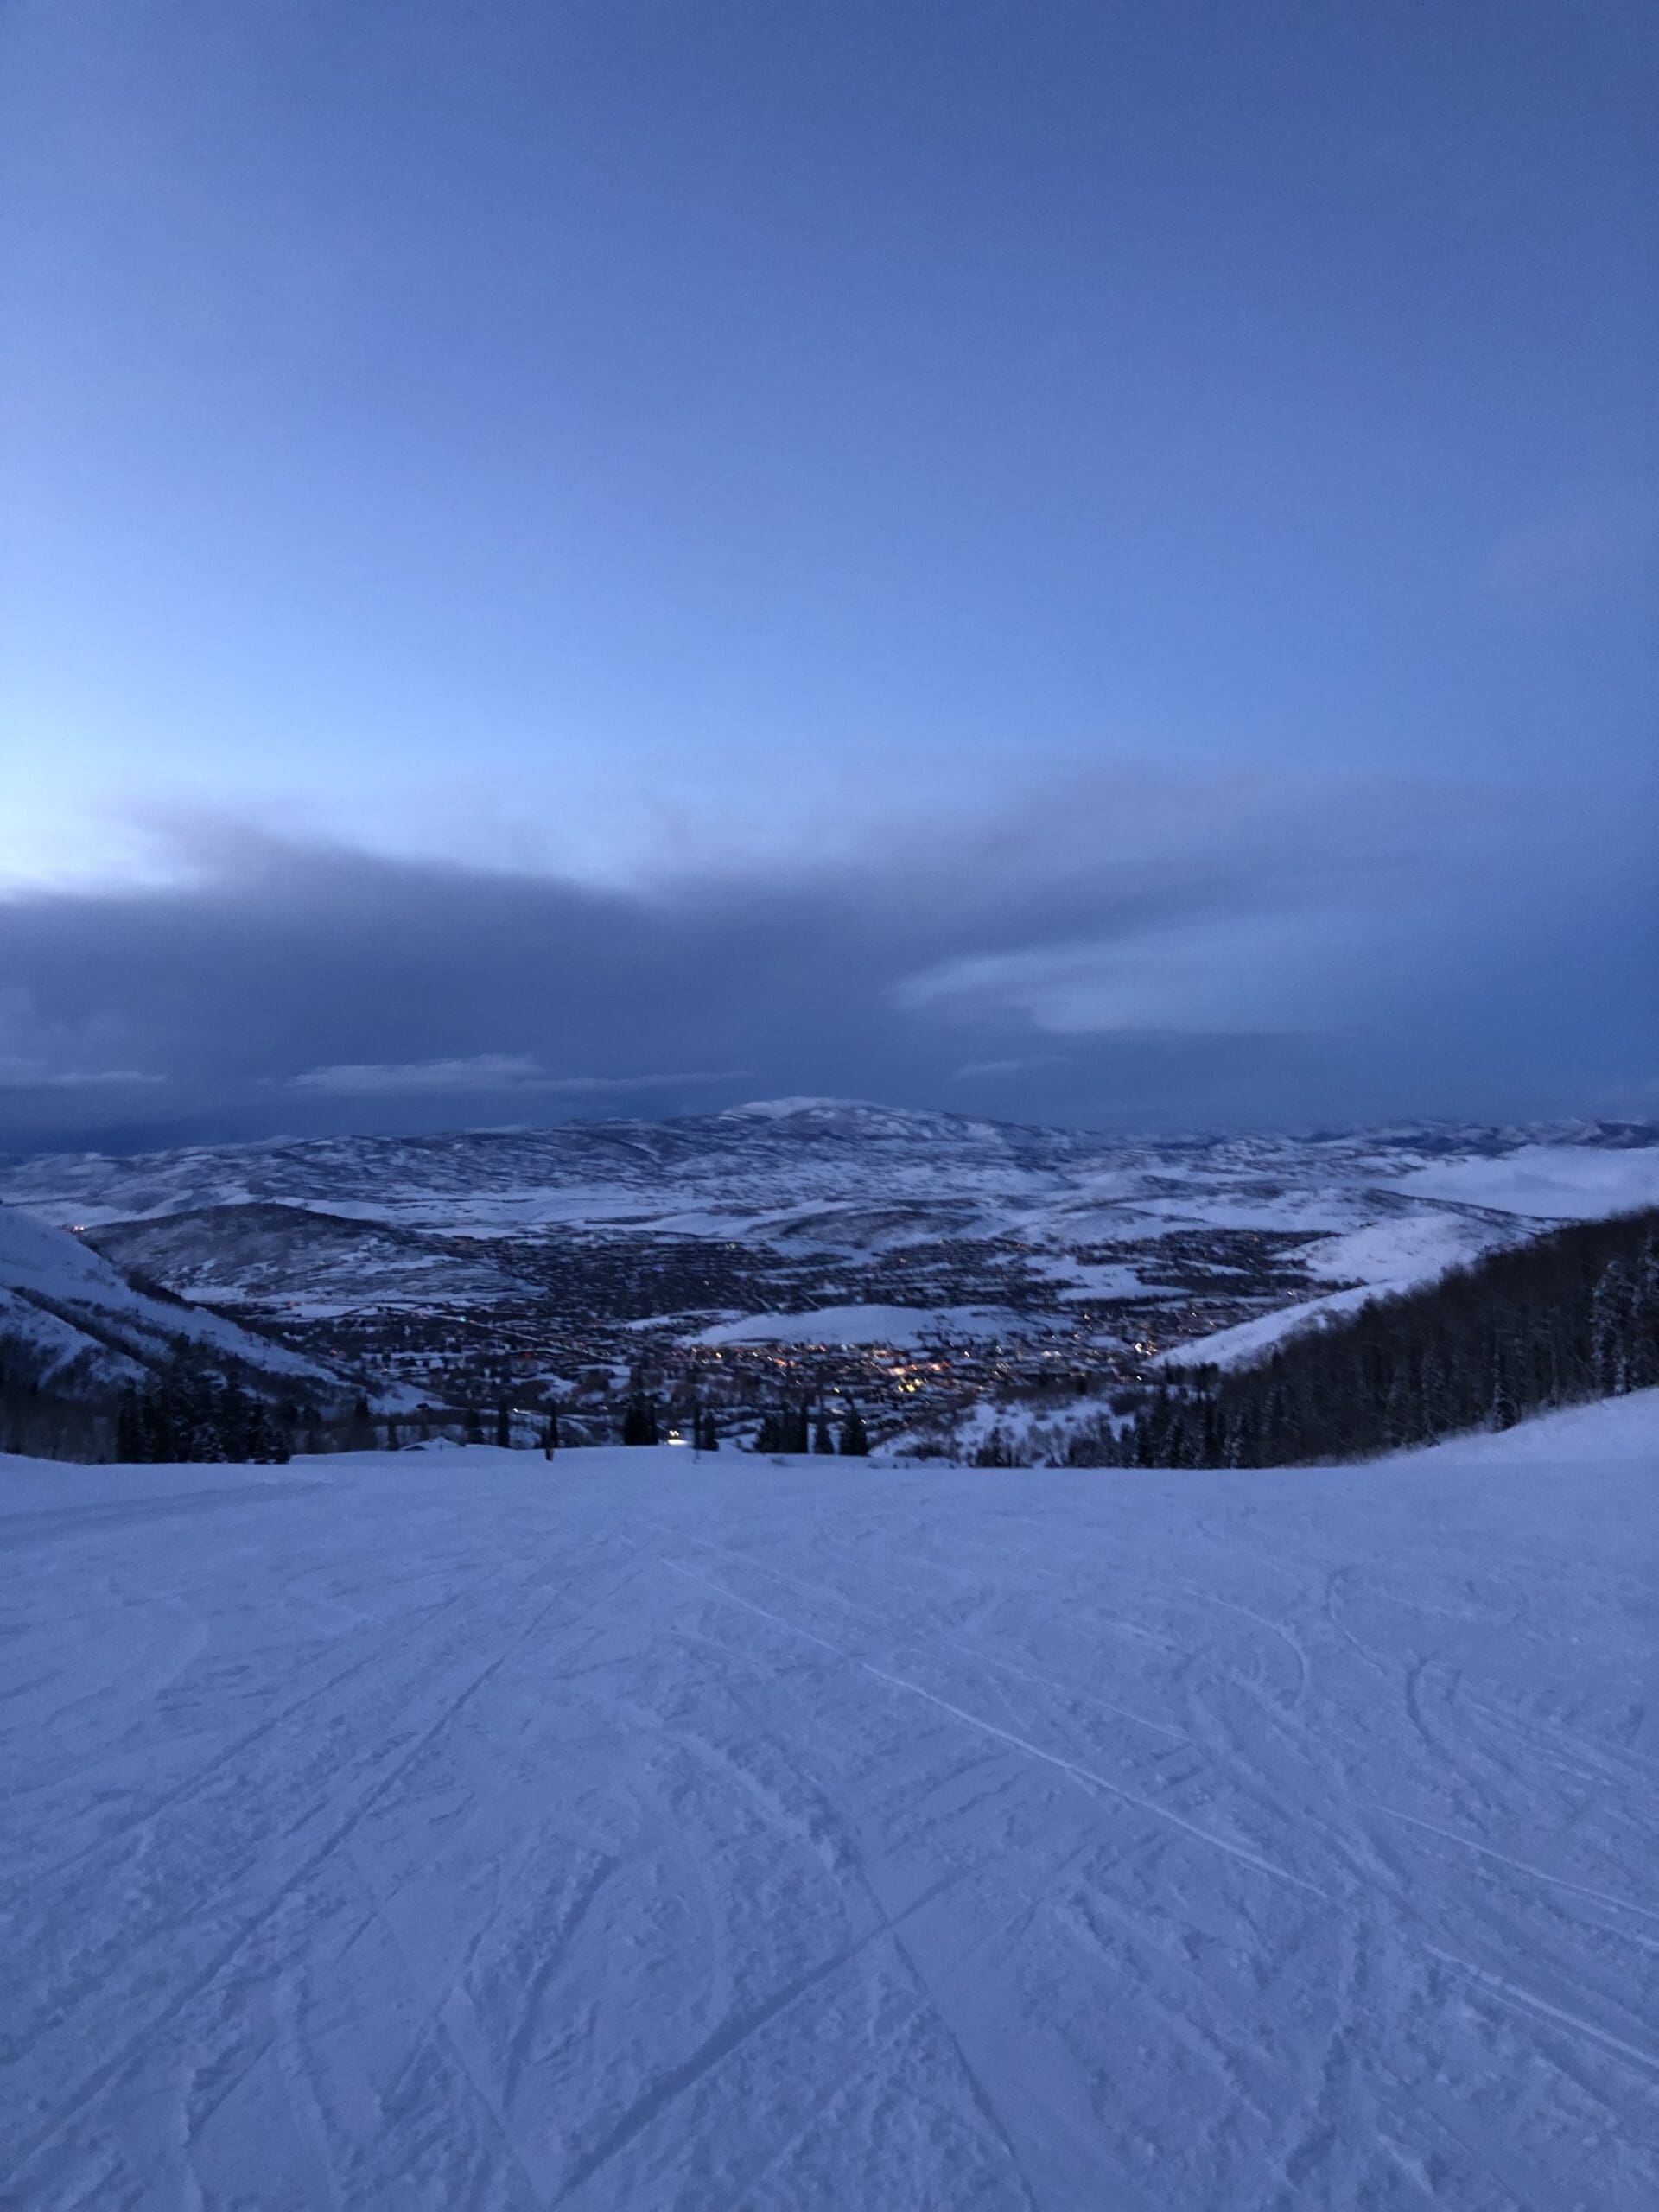 An evening trek on the uphill travel route at Park City Mountain taken March 23, 2023.